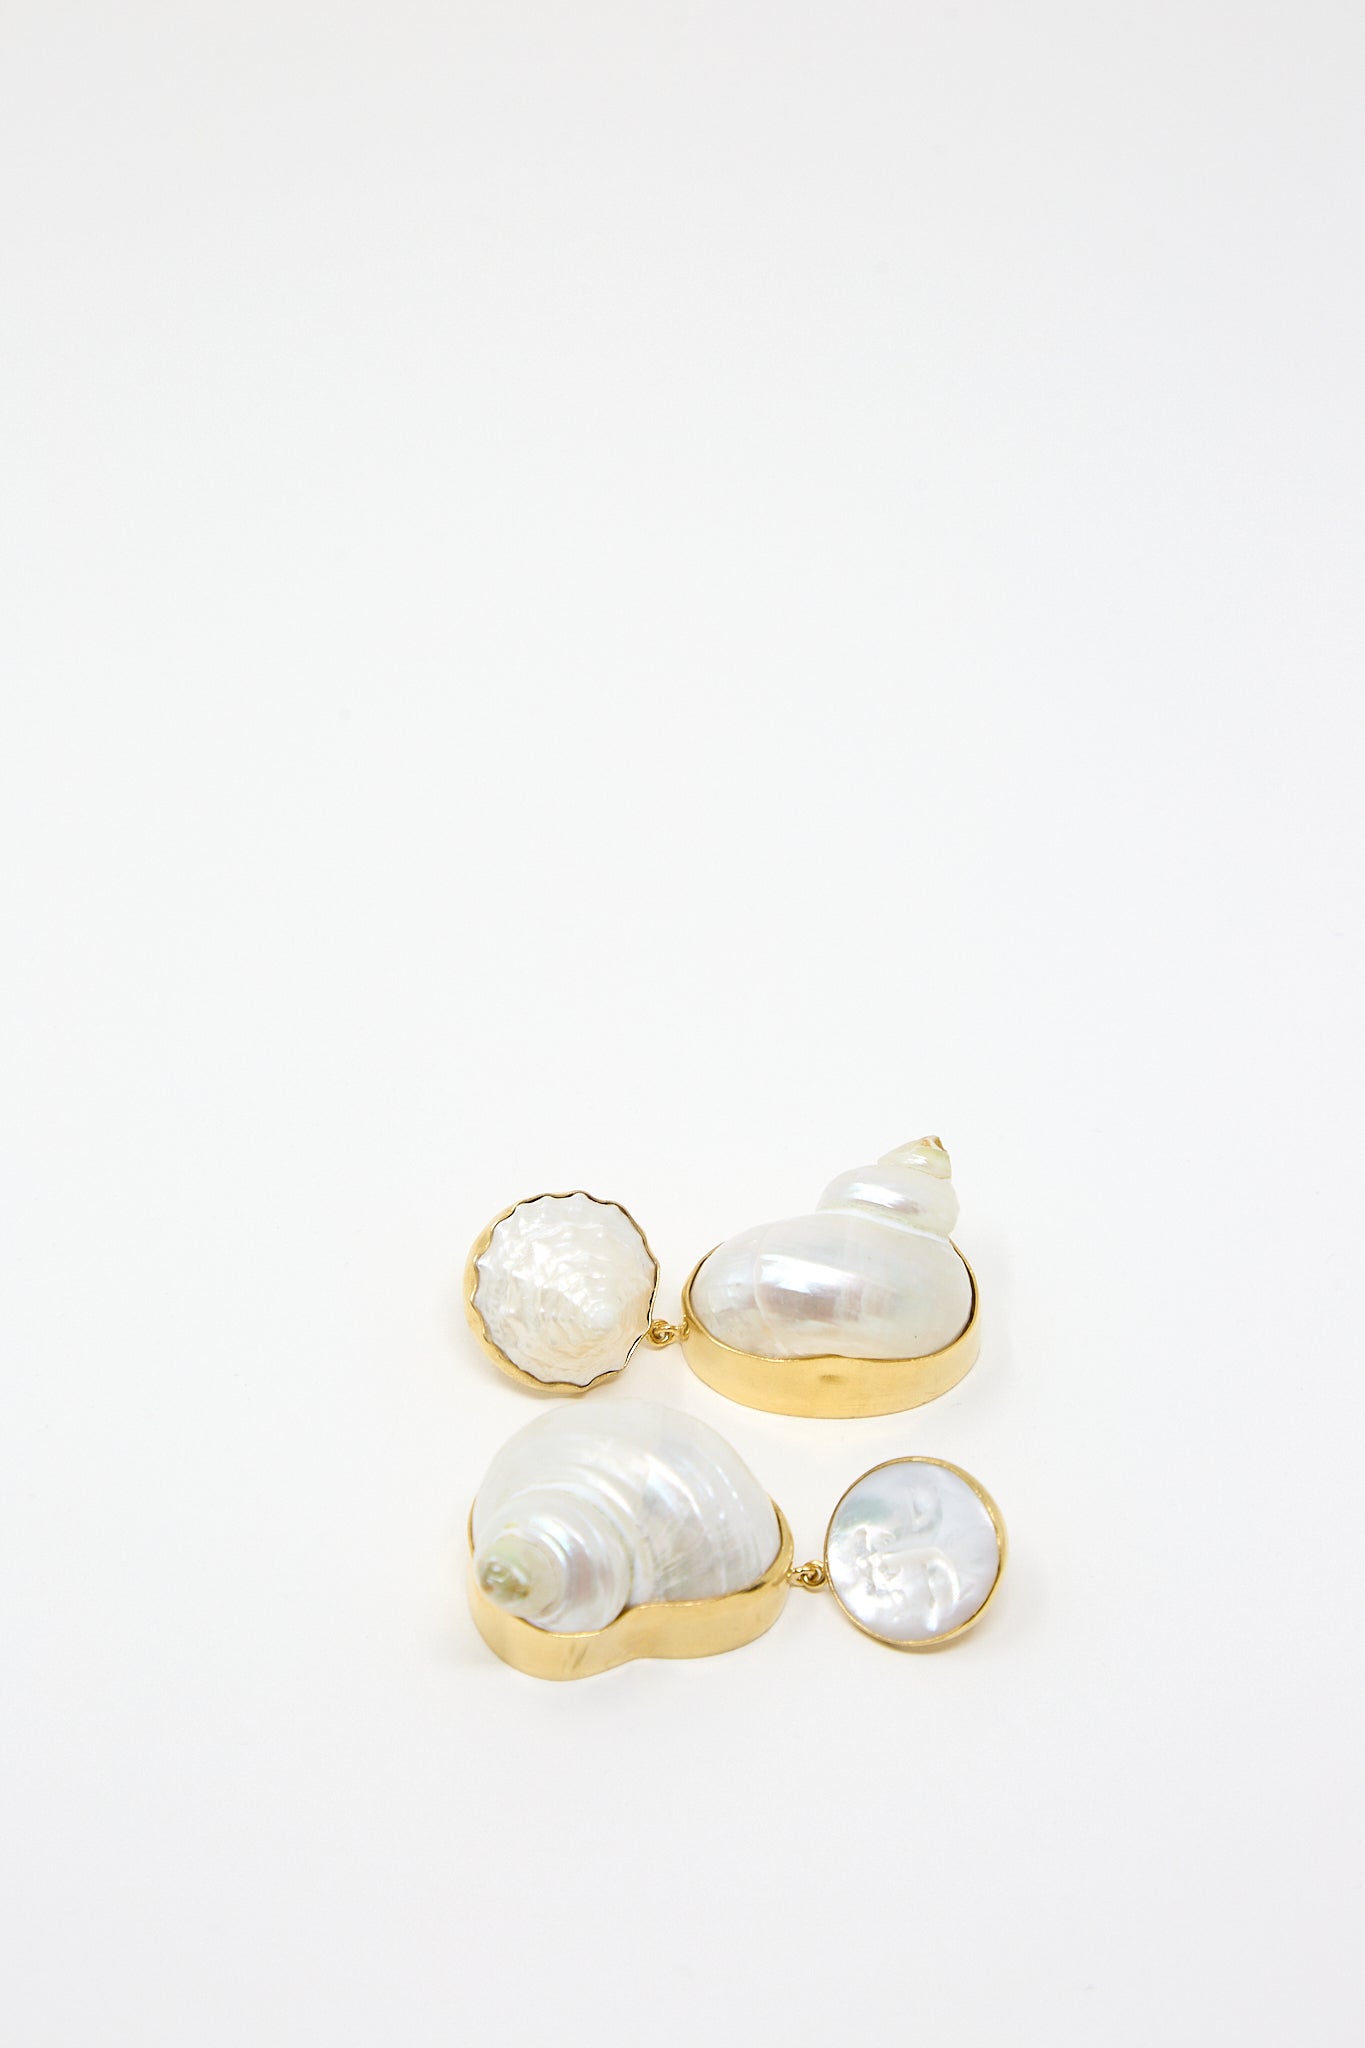 A pair of Grainne Morton Moon and Star Shell Drop Earrings, made of 18K gold-plated silver and Mother of Pearl, on a white surface.